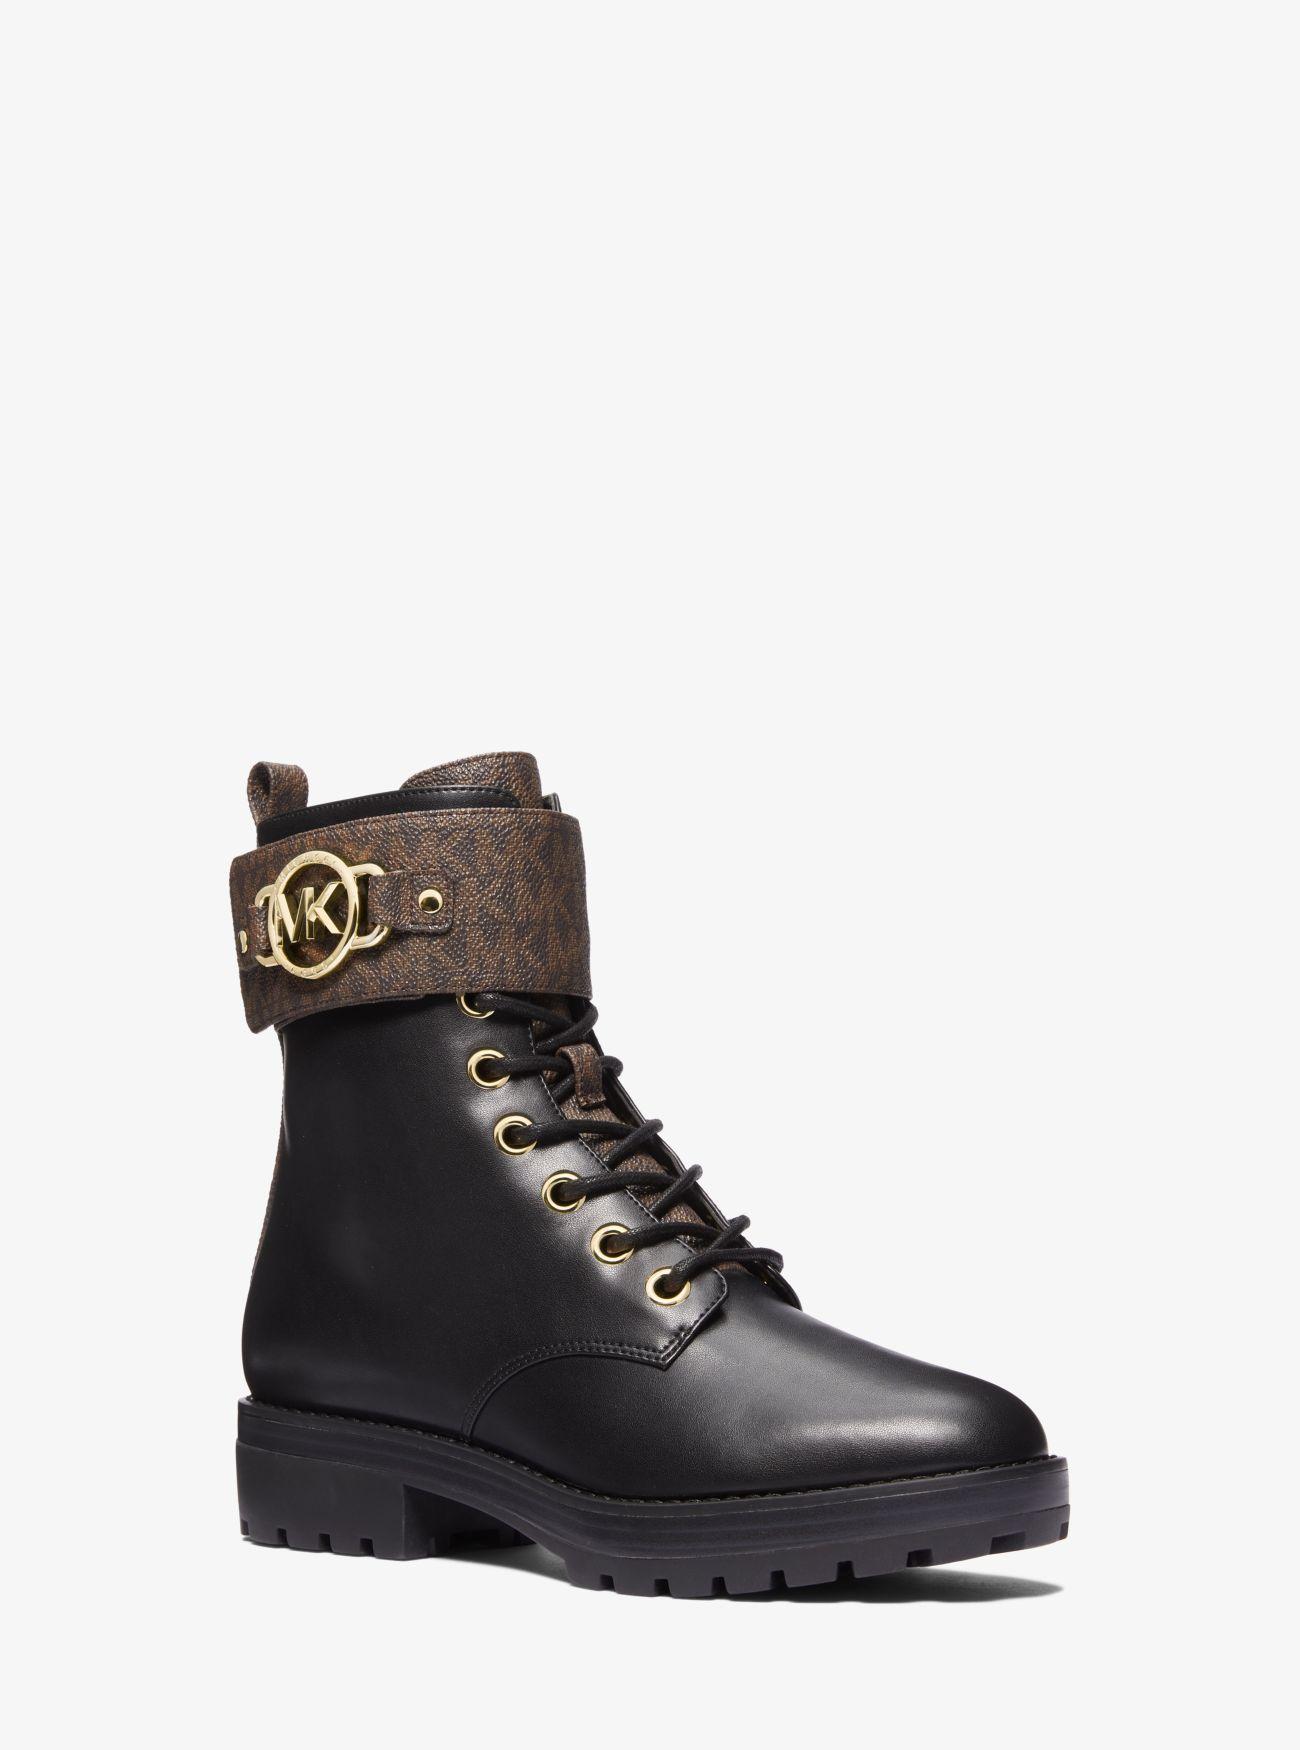 Michael Kors Rory Faux Leather And Logo Combat Boot in Black | Lyst UK